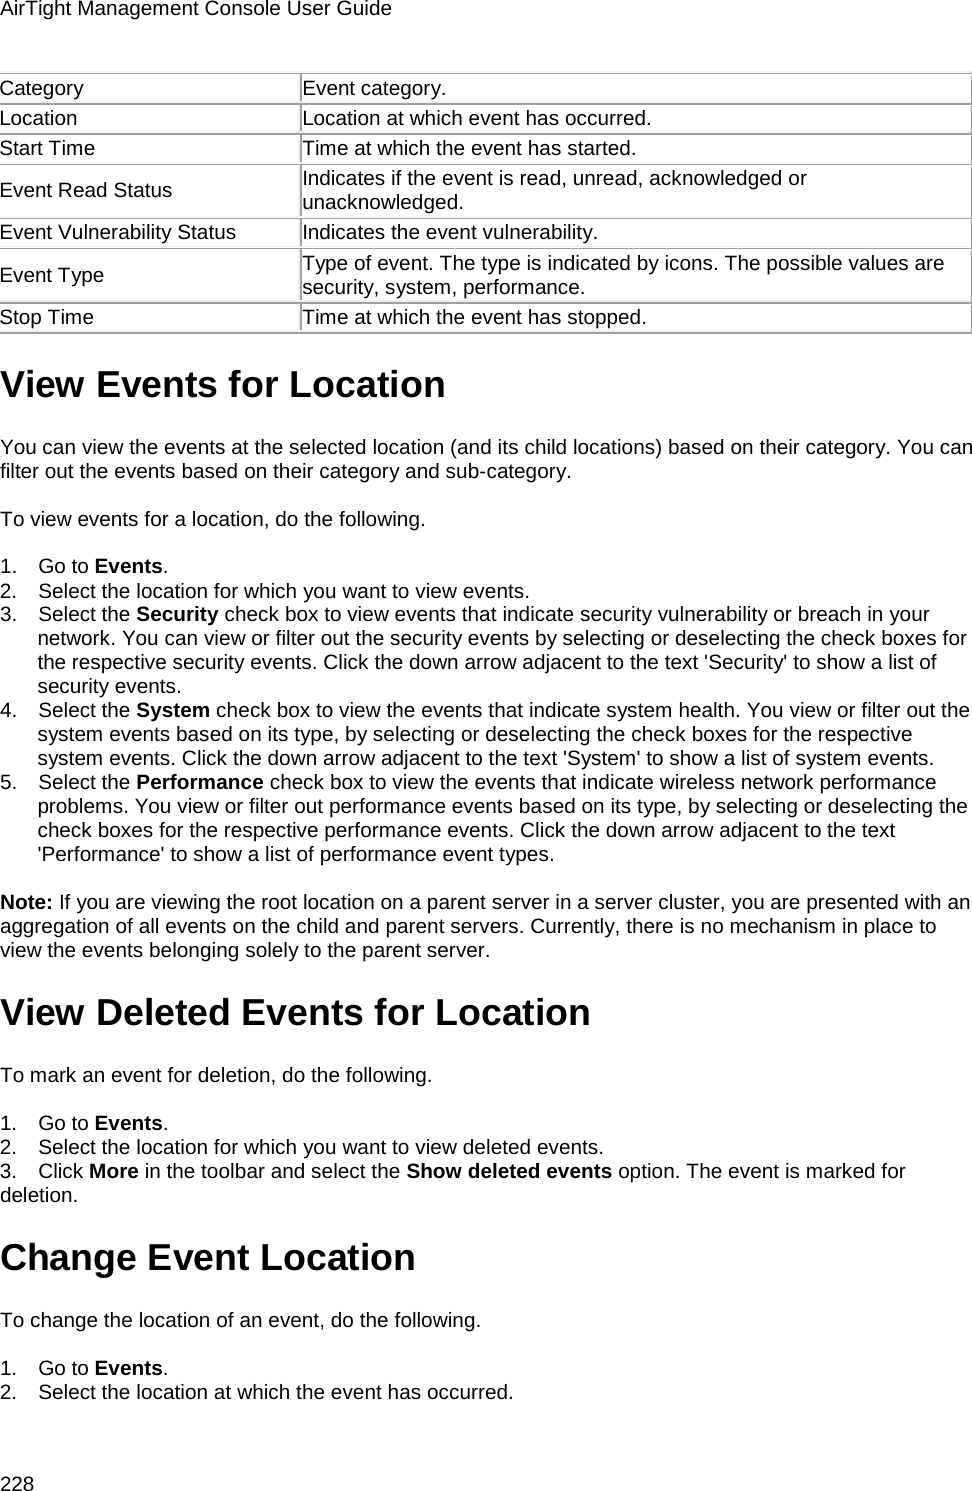 AirTight Management Console User Guide 228 Category  Event category. Location Location at which event has occurred. Start Time  Time at which the event has started. Event Read Status Indicates if the event is read, unread, acknowledged or unacknowledged. Event Vulnerability Status Indicates the event vulnerability. Event Type Type of event. The type is indicated by icons. The possible values are security, system, performance. Stop Time Time at which the event has stopped. View Events for Location You can view the events at the selected location (and its child locations) based on their category. You can filter out the events based on their category and sub-category.   To view events for a location, do the following.   1.      Go to Events. 2.      Select the location for which you want to view events. 3.      Select the Security check box to view events that indicate security vulnerability or breach in your network. You can view or filter out the security events by selecting or deselecting the check boxes for the respective security events. Click the down arrow adjacent to the text &apos;Security&apos; to show a list of security events. 4.      Select the System check box to view the events that indicate system health. You view or filter out the system events based on its type, by selecting or deselecting the check boxes for the respective system events. Click the down arrow adjacent to the text &apos;System&apos; to show a list of system events. 5.      Select the Performance check box to view the events that indicate wireless network performance problems. You view or filter out performance events based on its type, by selecting or deselecting the check boxes for the respective performance events. Click the down arrow adjacent to the text &apos;Performance&apos; to show a list of performance event types.   Note: If you are viewing the root location on a parent server in a server cluster, you are presented with an aggregation of all events on the child and parent servers. Currently, there is no mechanism in place to view the events belonging solely to the parent server. View Deleted Events for Location To mark an event for deletion, do the following.   1.      Go to Events. 2.      Select the location for which you want to view deleted events. 3.      Click More in the toolbar and select the Show deleted events option. The event is marked for deletion. Change Event Location To change the location of an event, do the following.   1.      Go to Events. 2.      Select the location at which the event has occurred. 